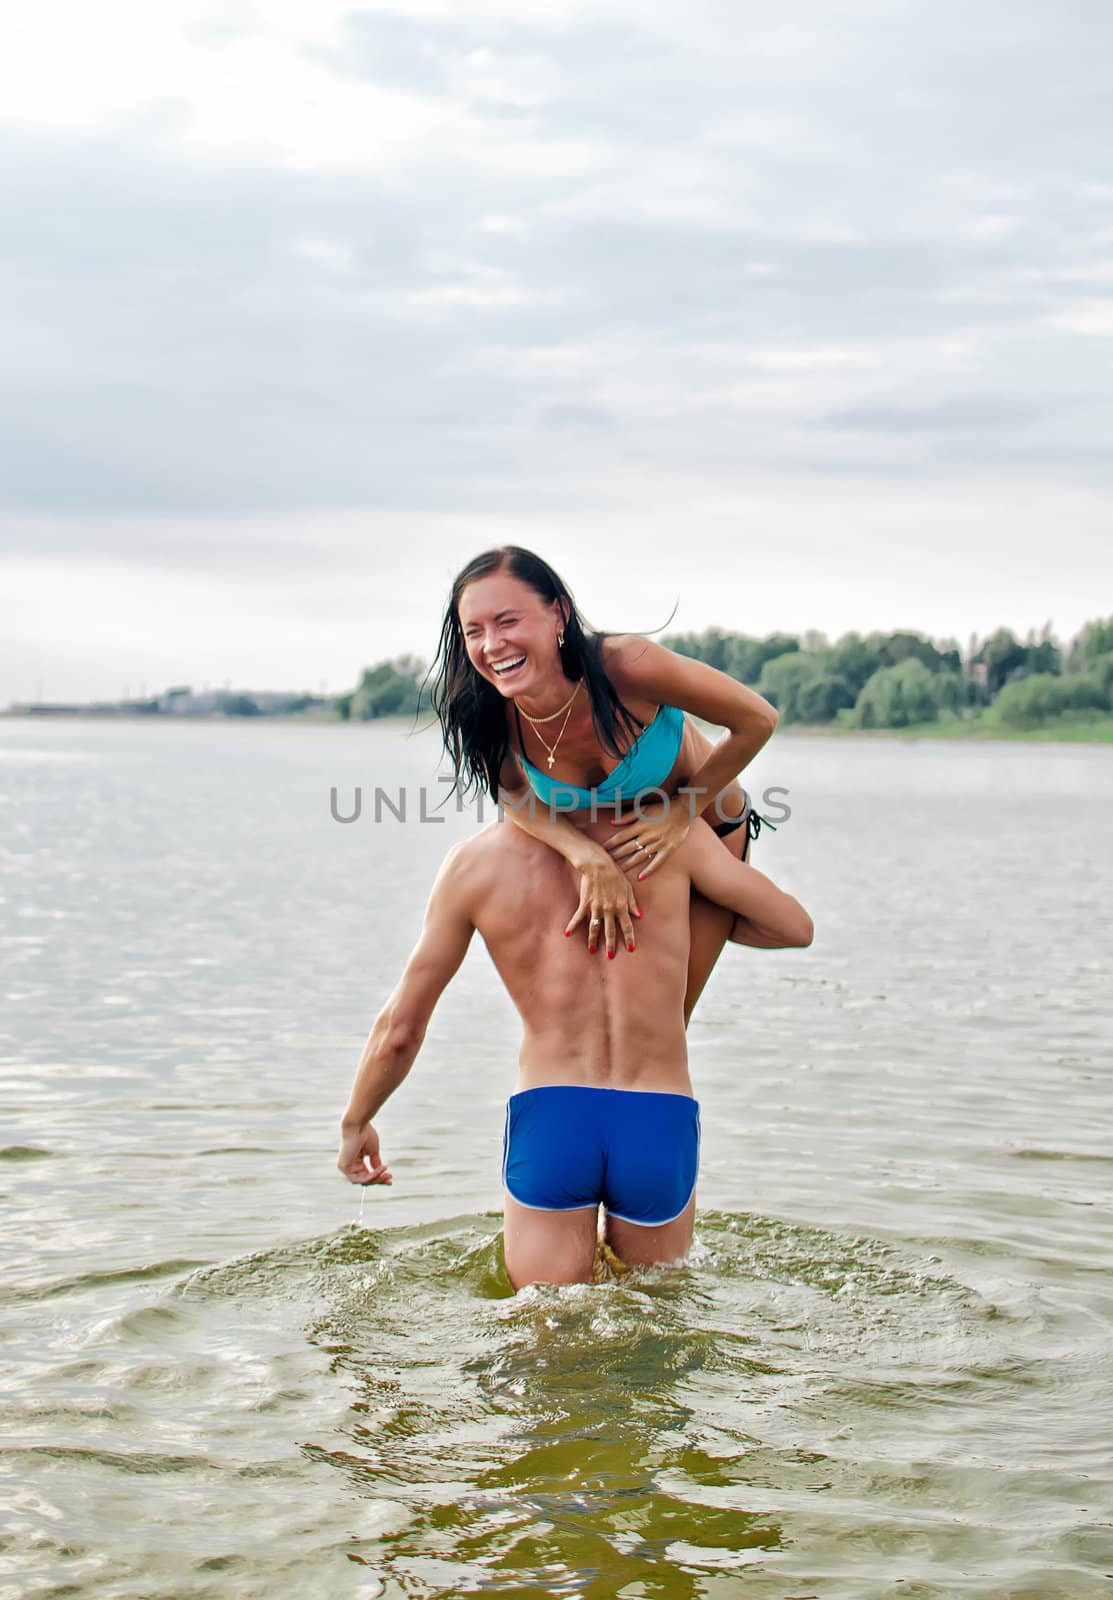 Man carrying woman on shoulder in the sea